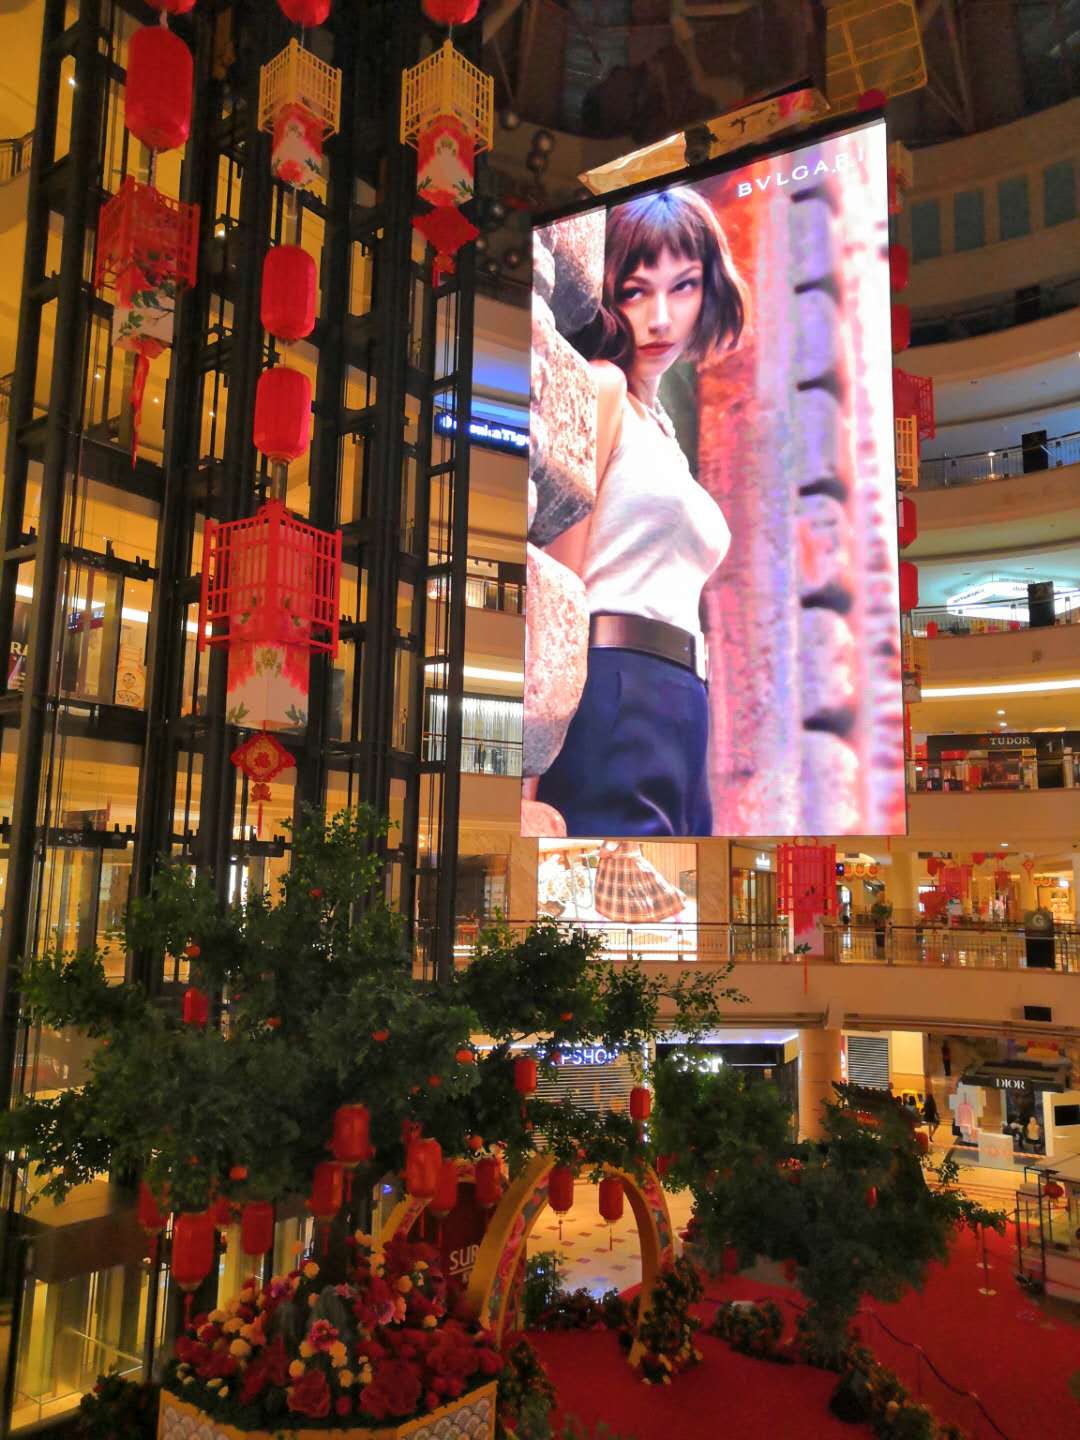 suria-klcc-mall-kl-malaysia-the-world-largest-led-hanging-rotating-double-sided-screen-display-ledsign-engineering2_1_orig